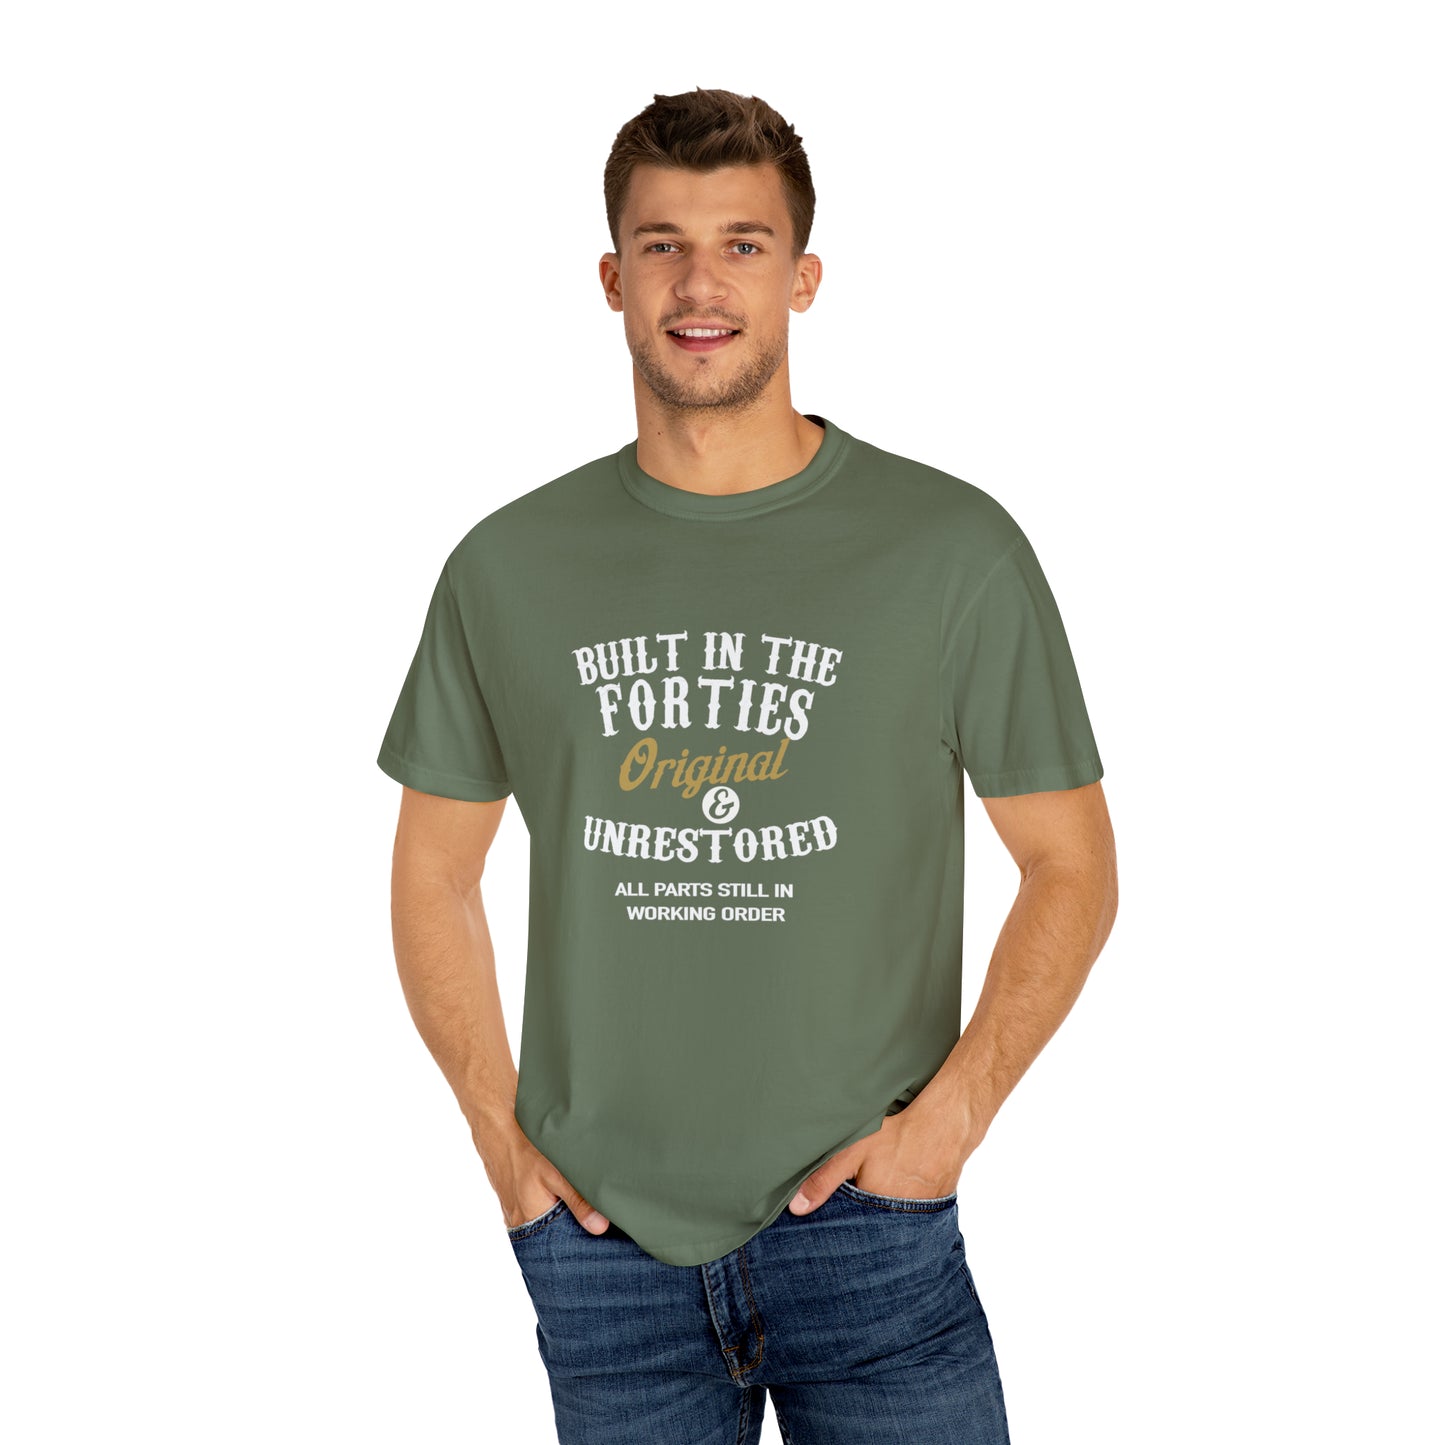 "Authentic Forties: Vintage Hat with Original Parts in Working Order" T-Shirt